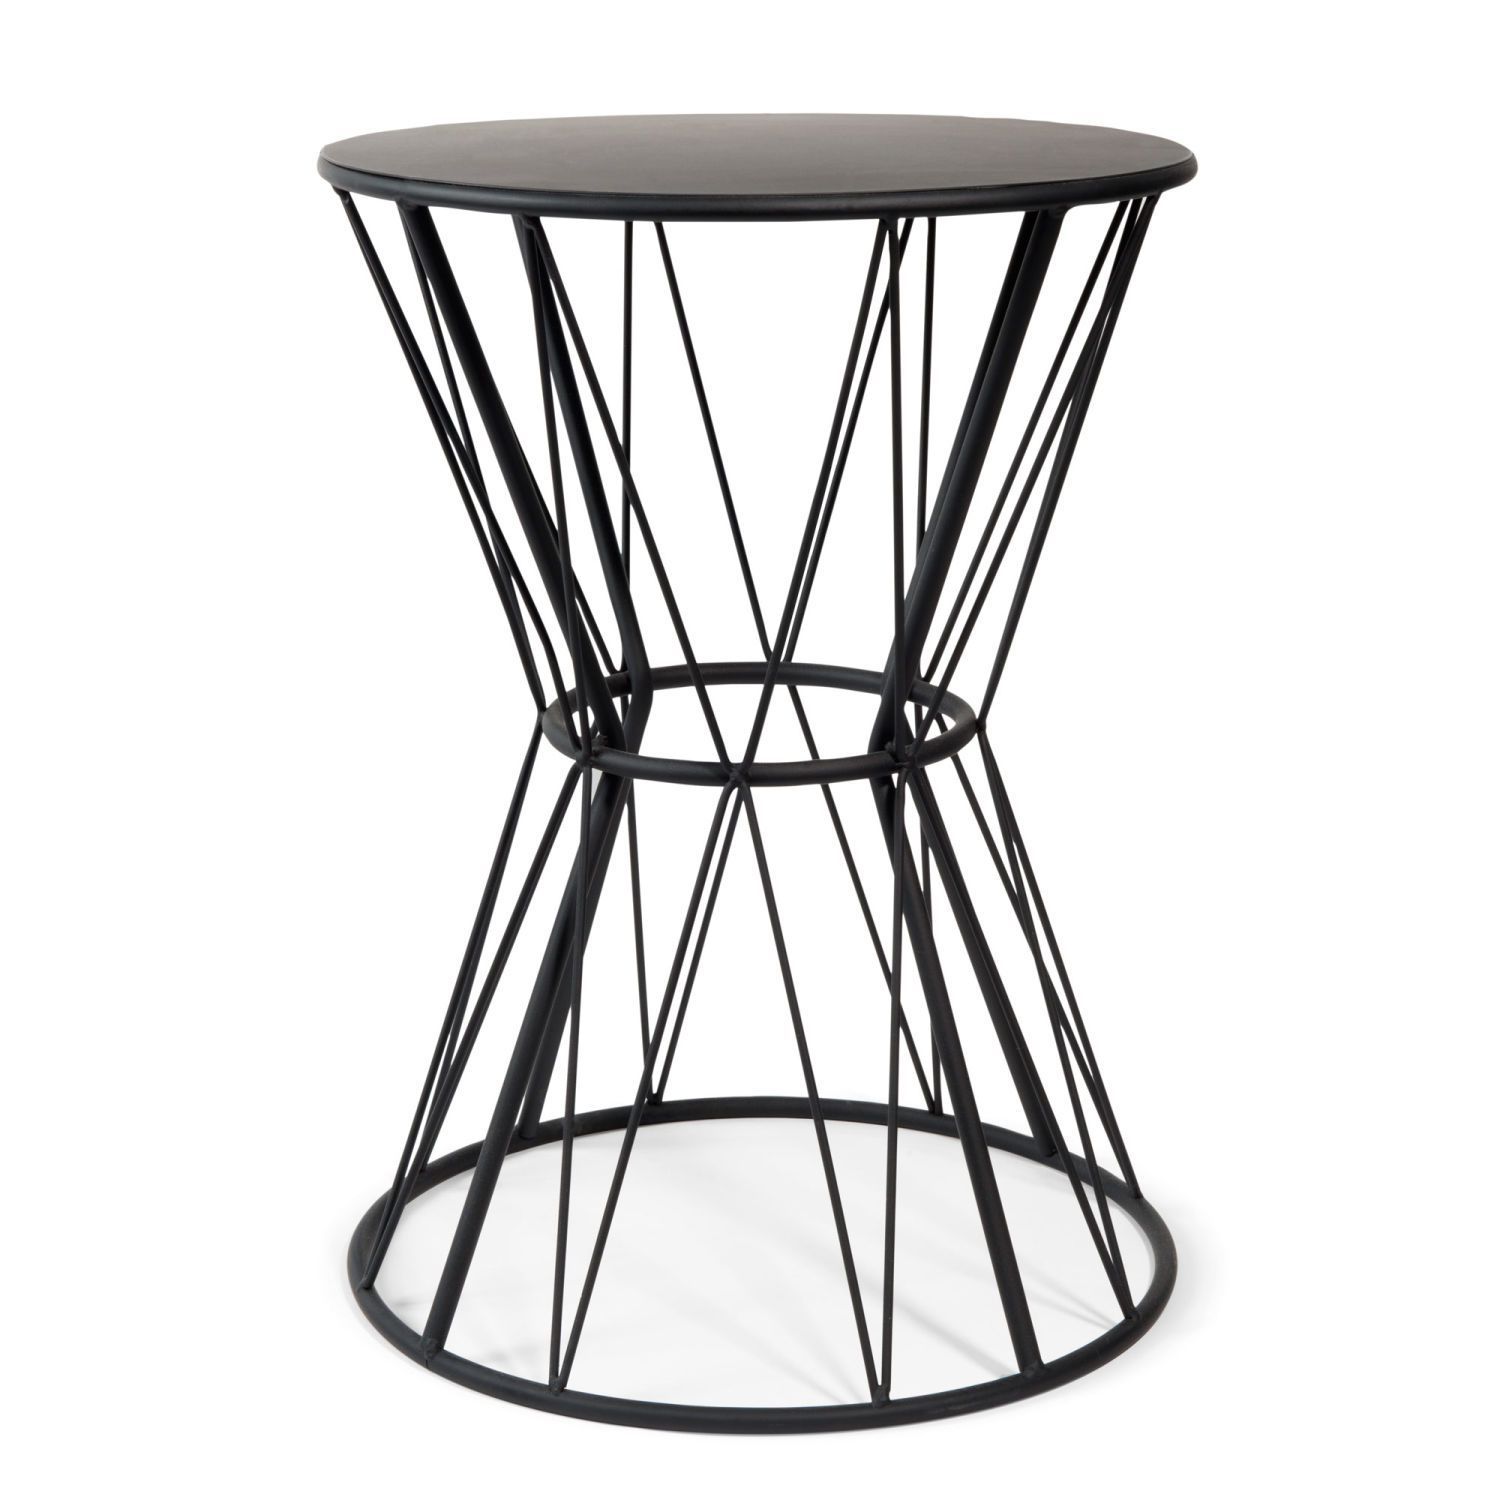 Black Metal End Table | Maisons Du Monde | Metal End Tables, Metal Sofa Intended For Metal Side Tables For Living Spaces (View 19 of 20)